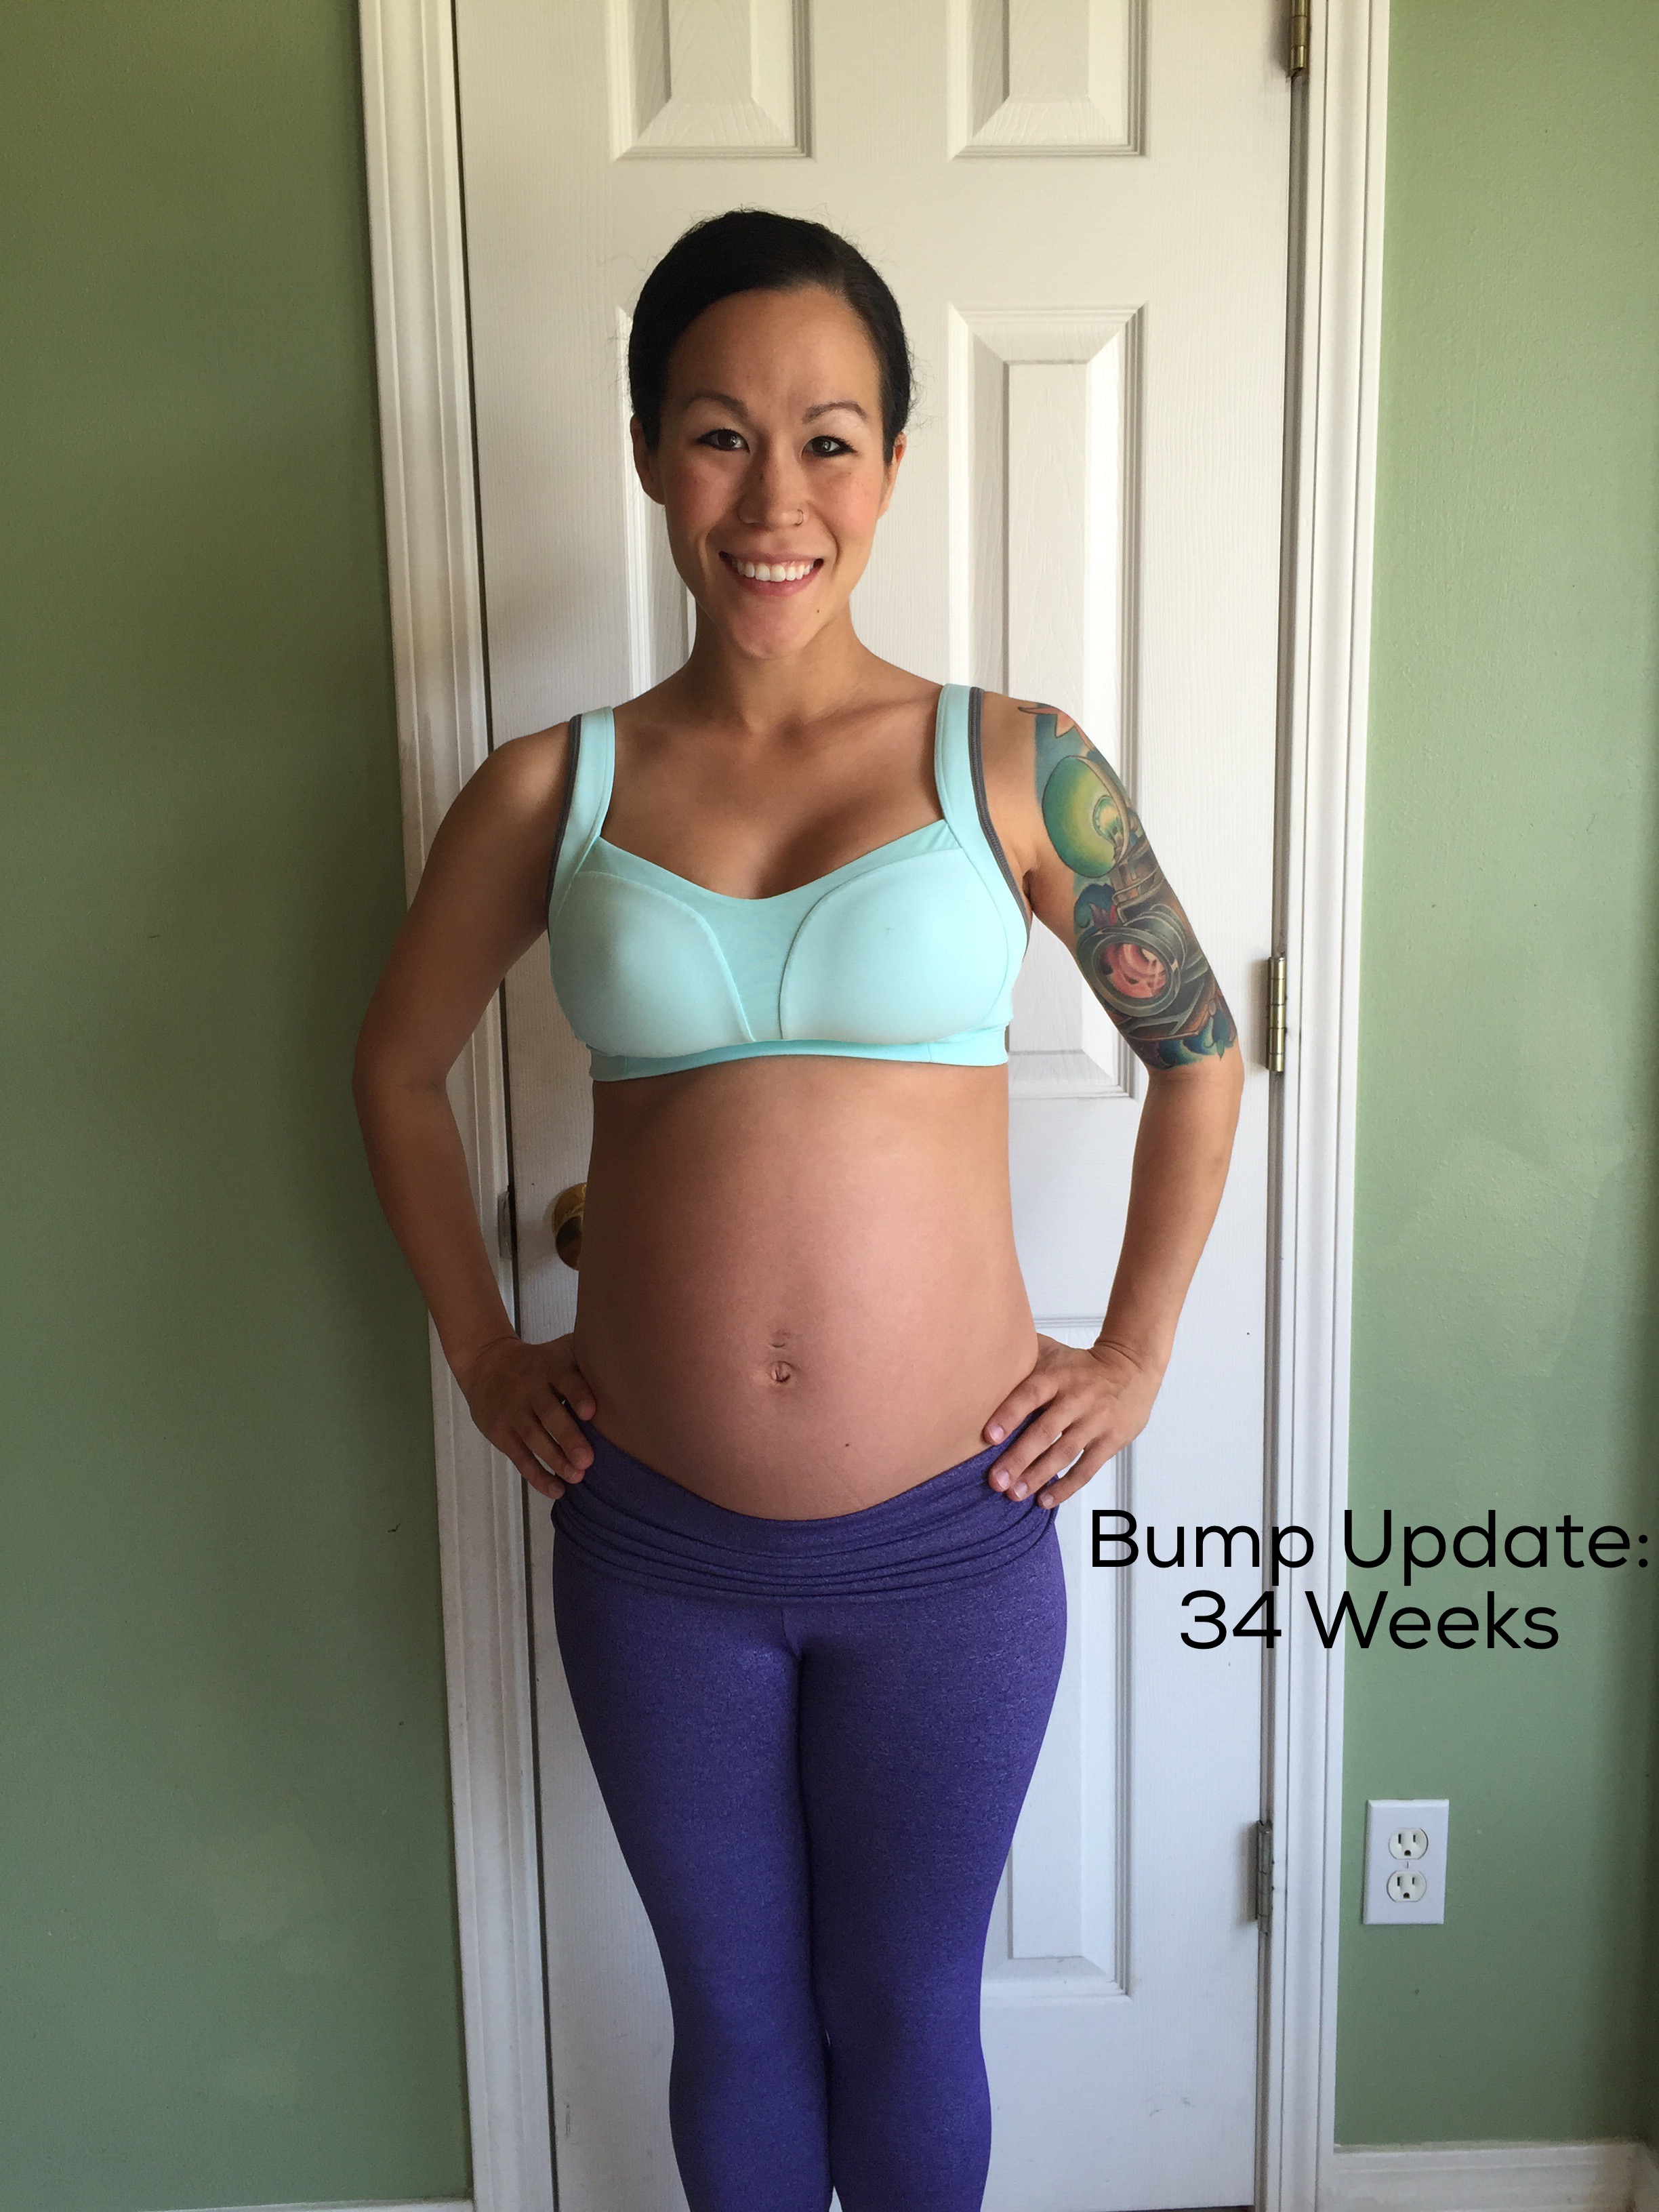 PREGNANCY: 34 Weeks Bump Update - Diary of a Fit Mommy2448 x 3264